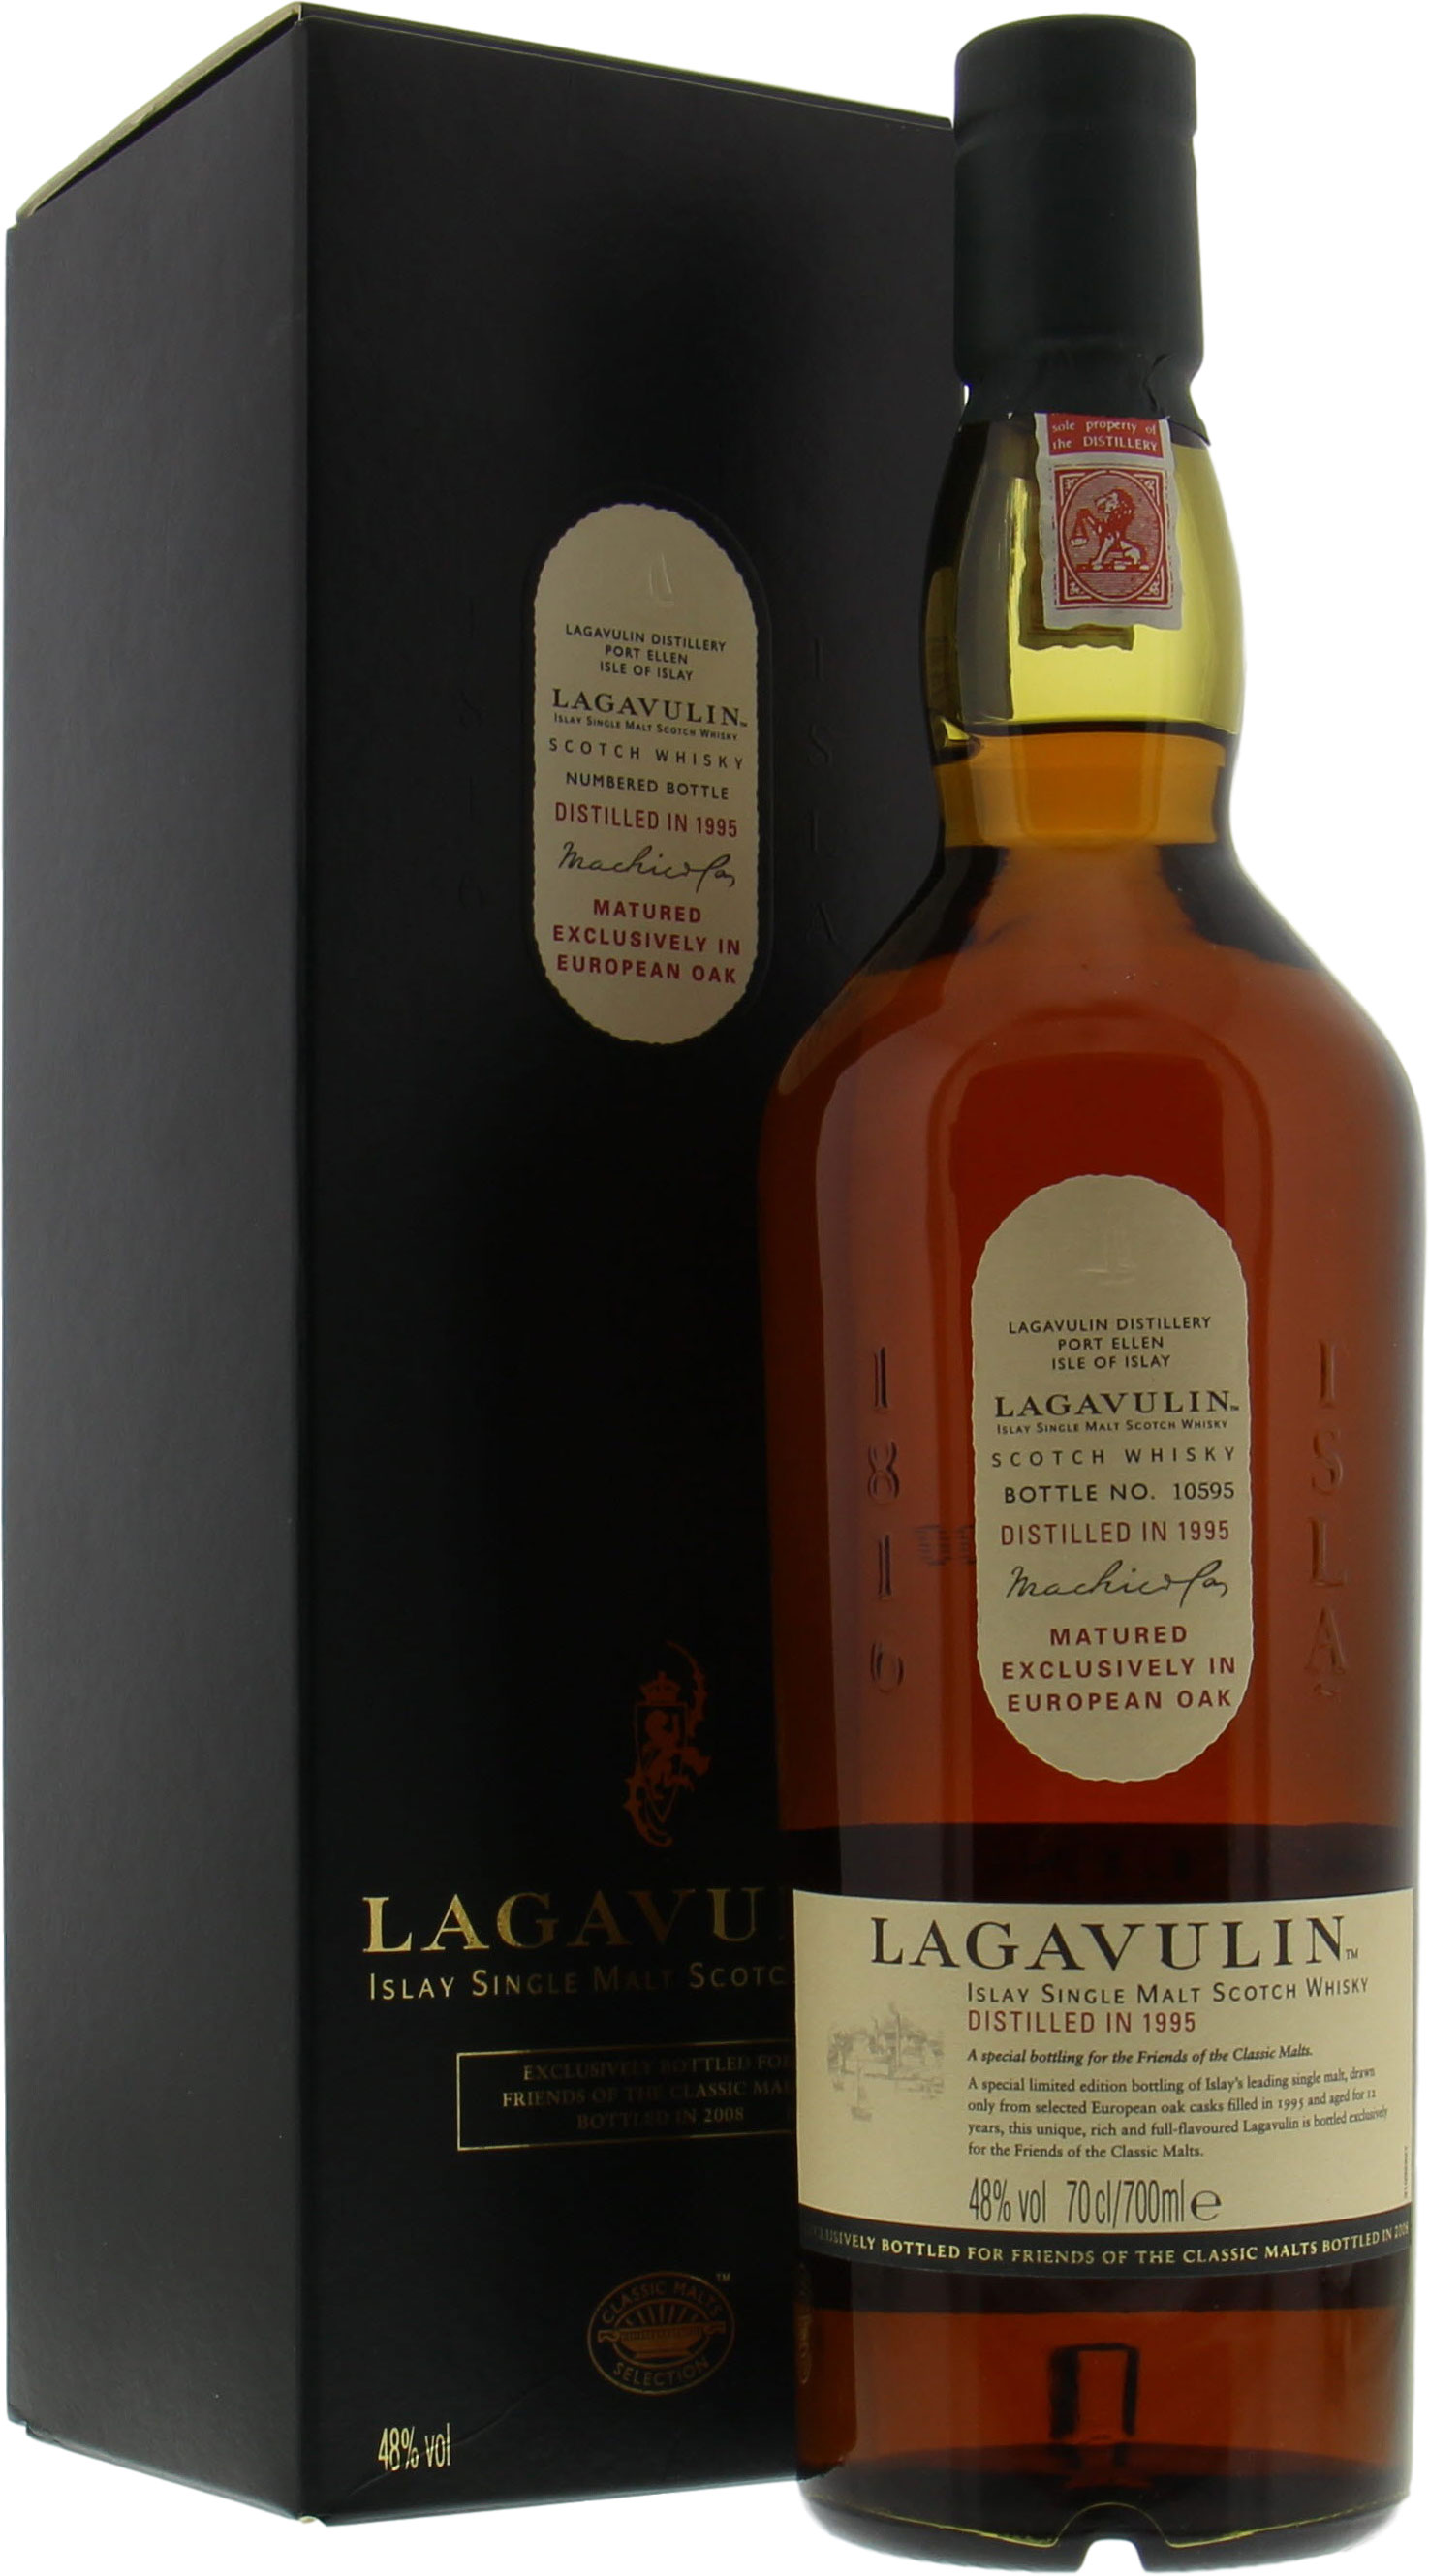 Lagavulin - 12 Years Old Friends of Classic Malts 48% 1995 10001